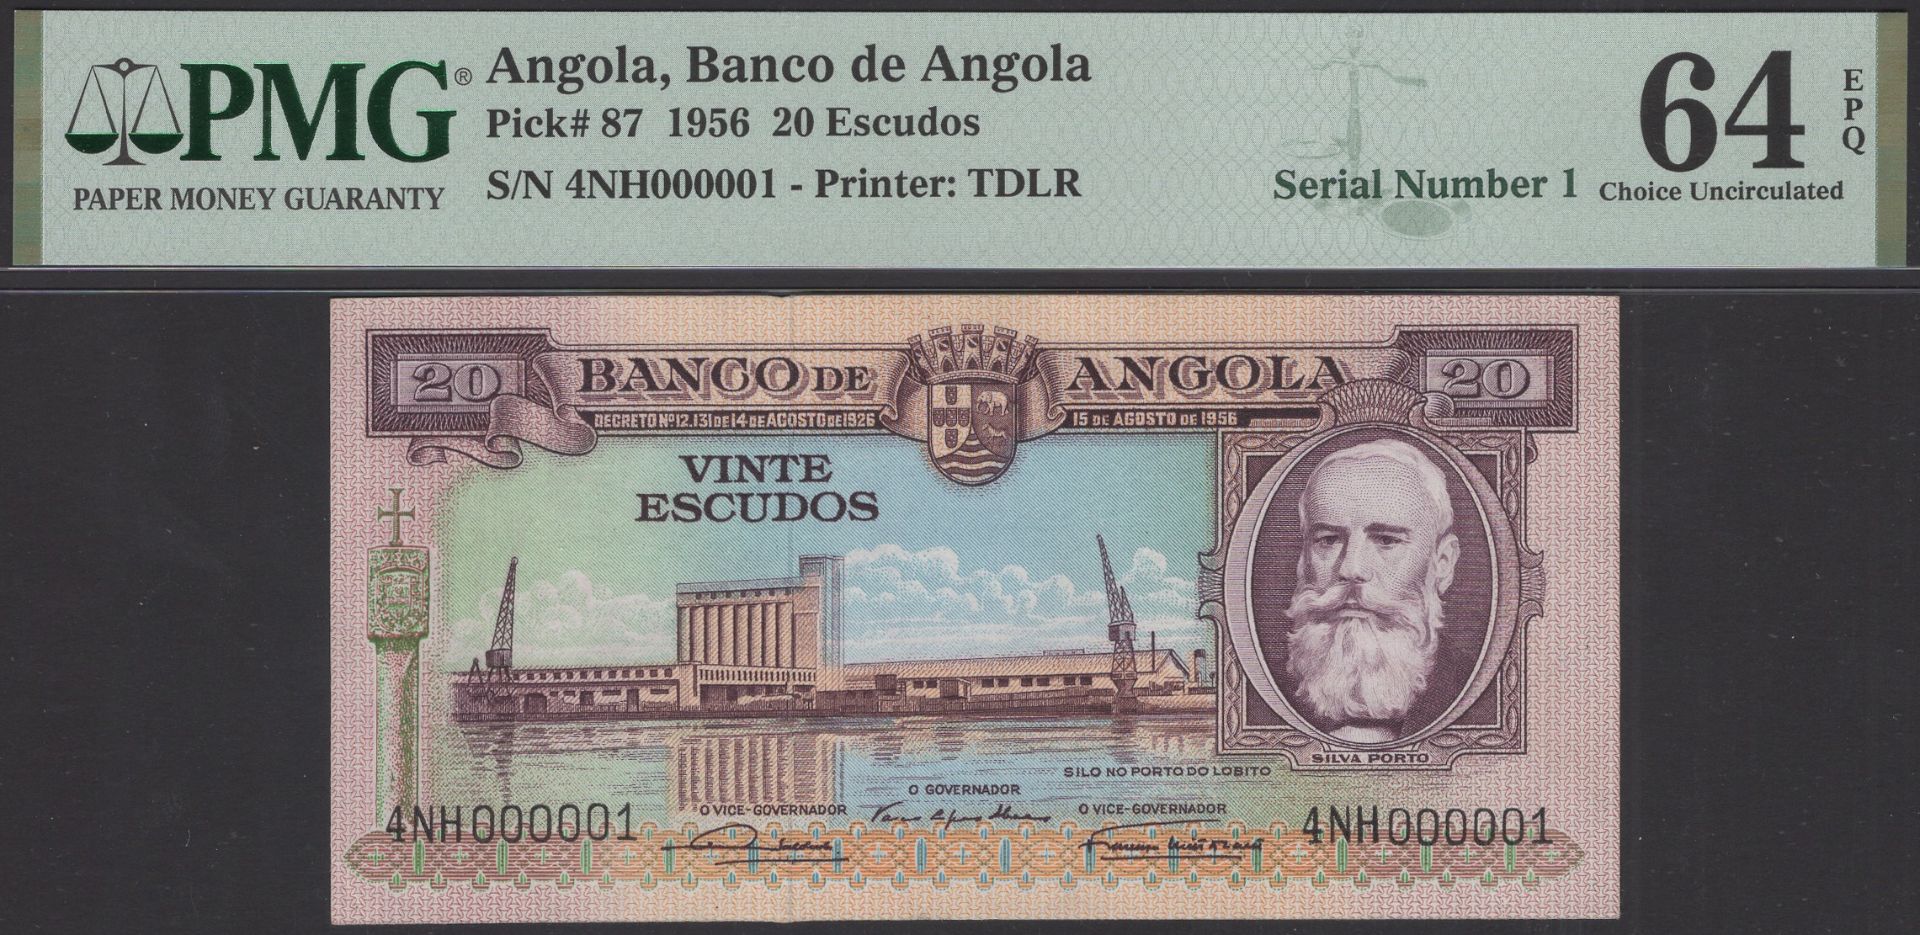 Banco de Angola, 20 Escudos, 15 August 1956, serial number 4NH000001, in PMG holder 64 EPQ,...